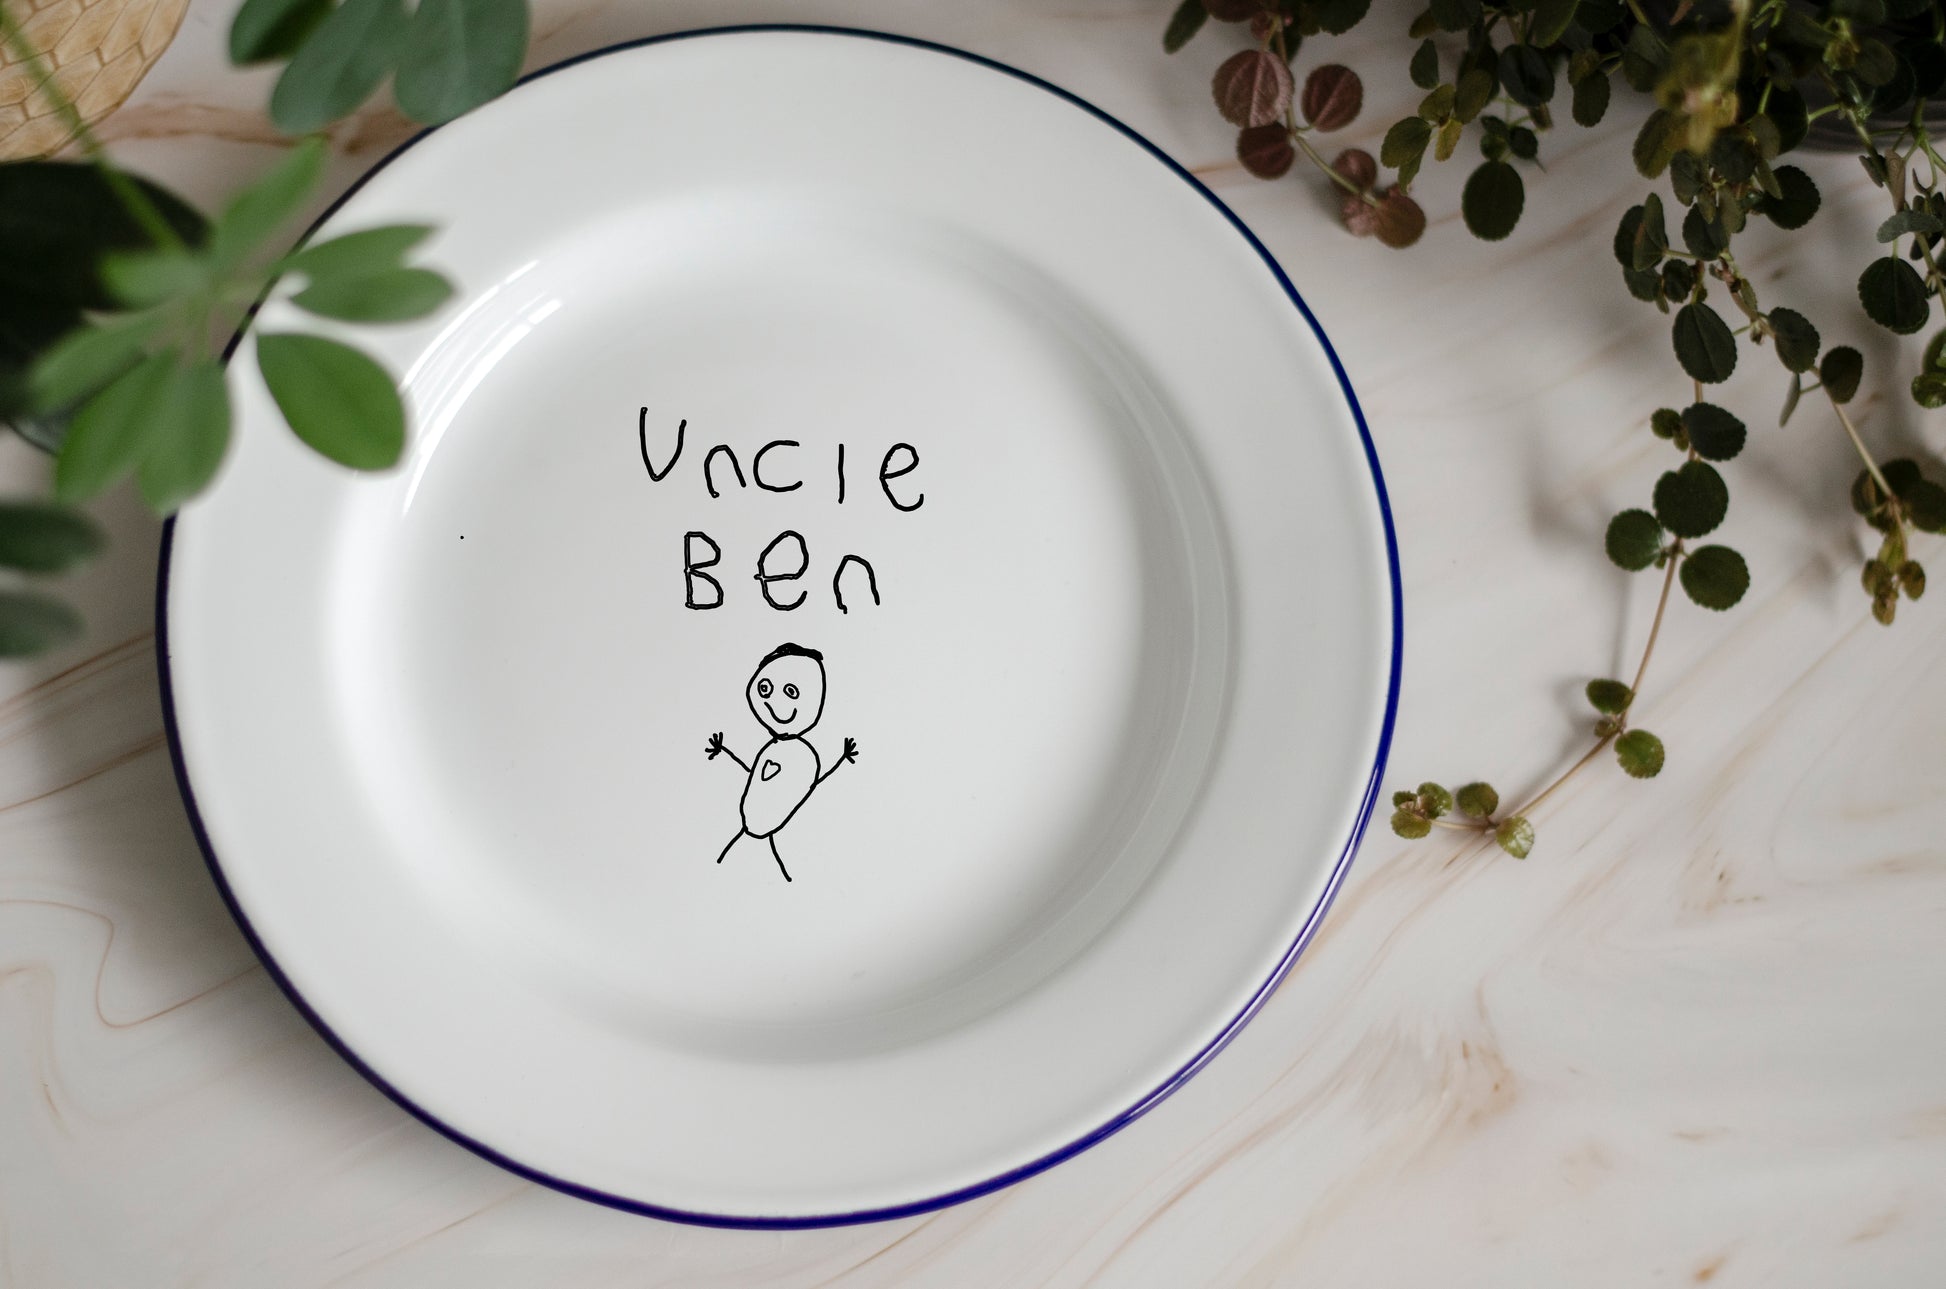 Your Child's Drawing or Writing - Engraved Enamel Plate - One Mama One Shed